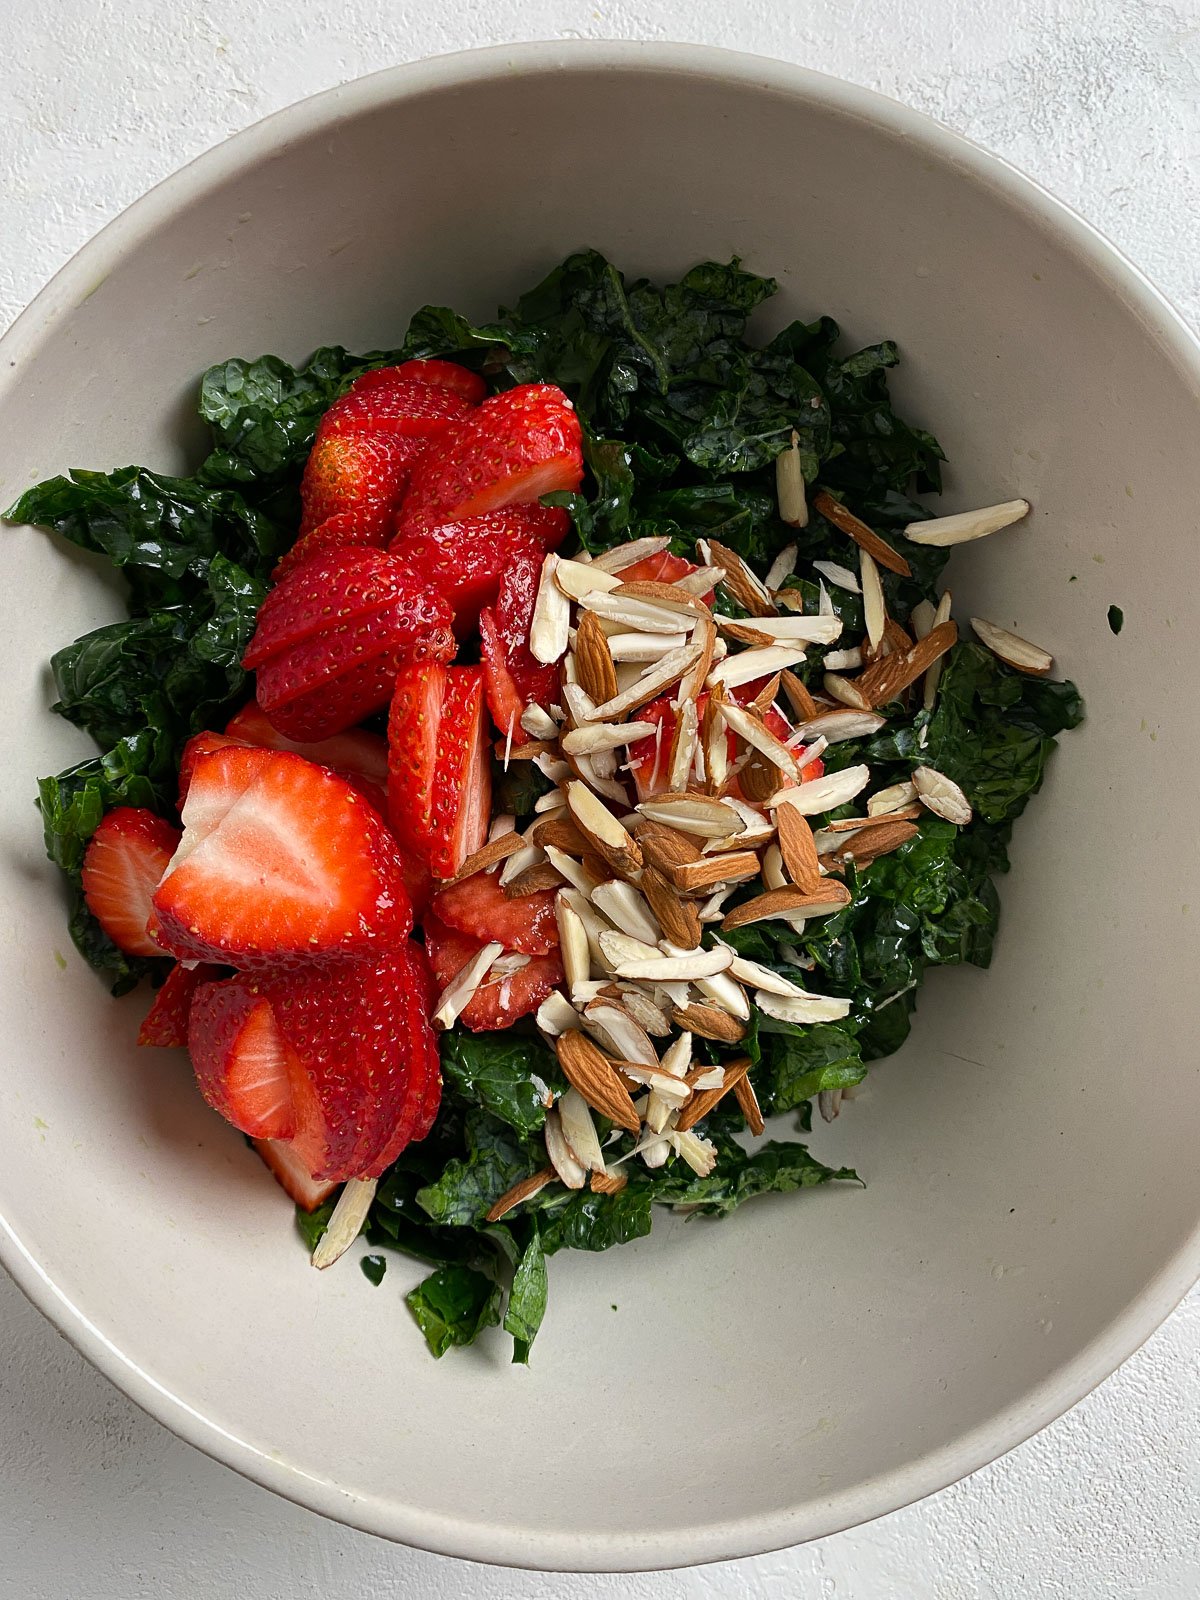 process showing addition of Strawberry Kale Salad ingredients into bowl